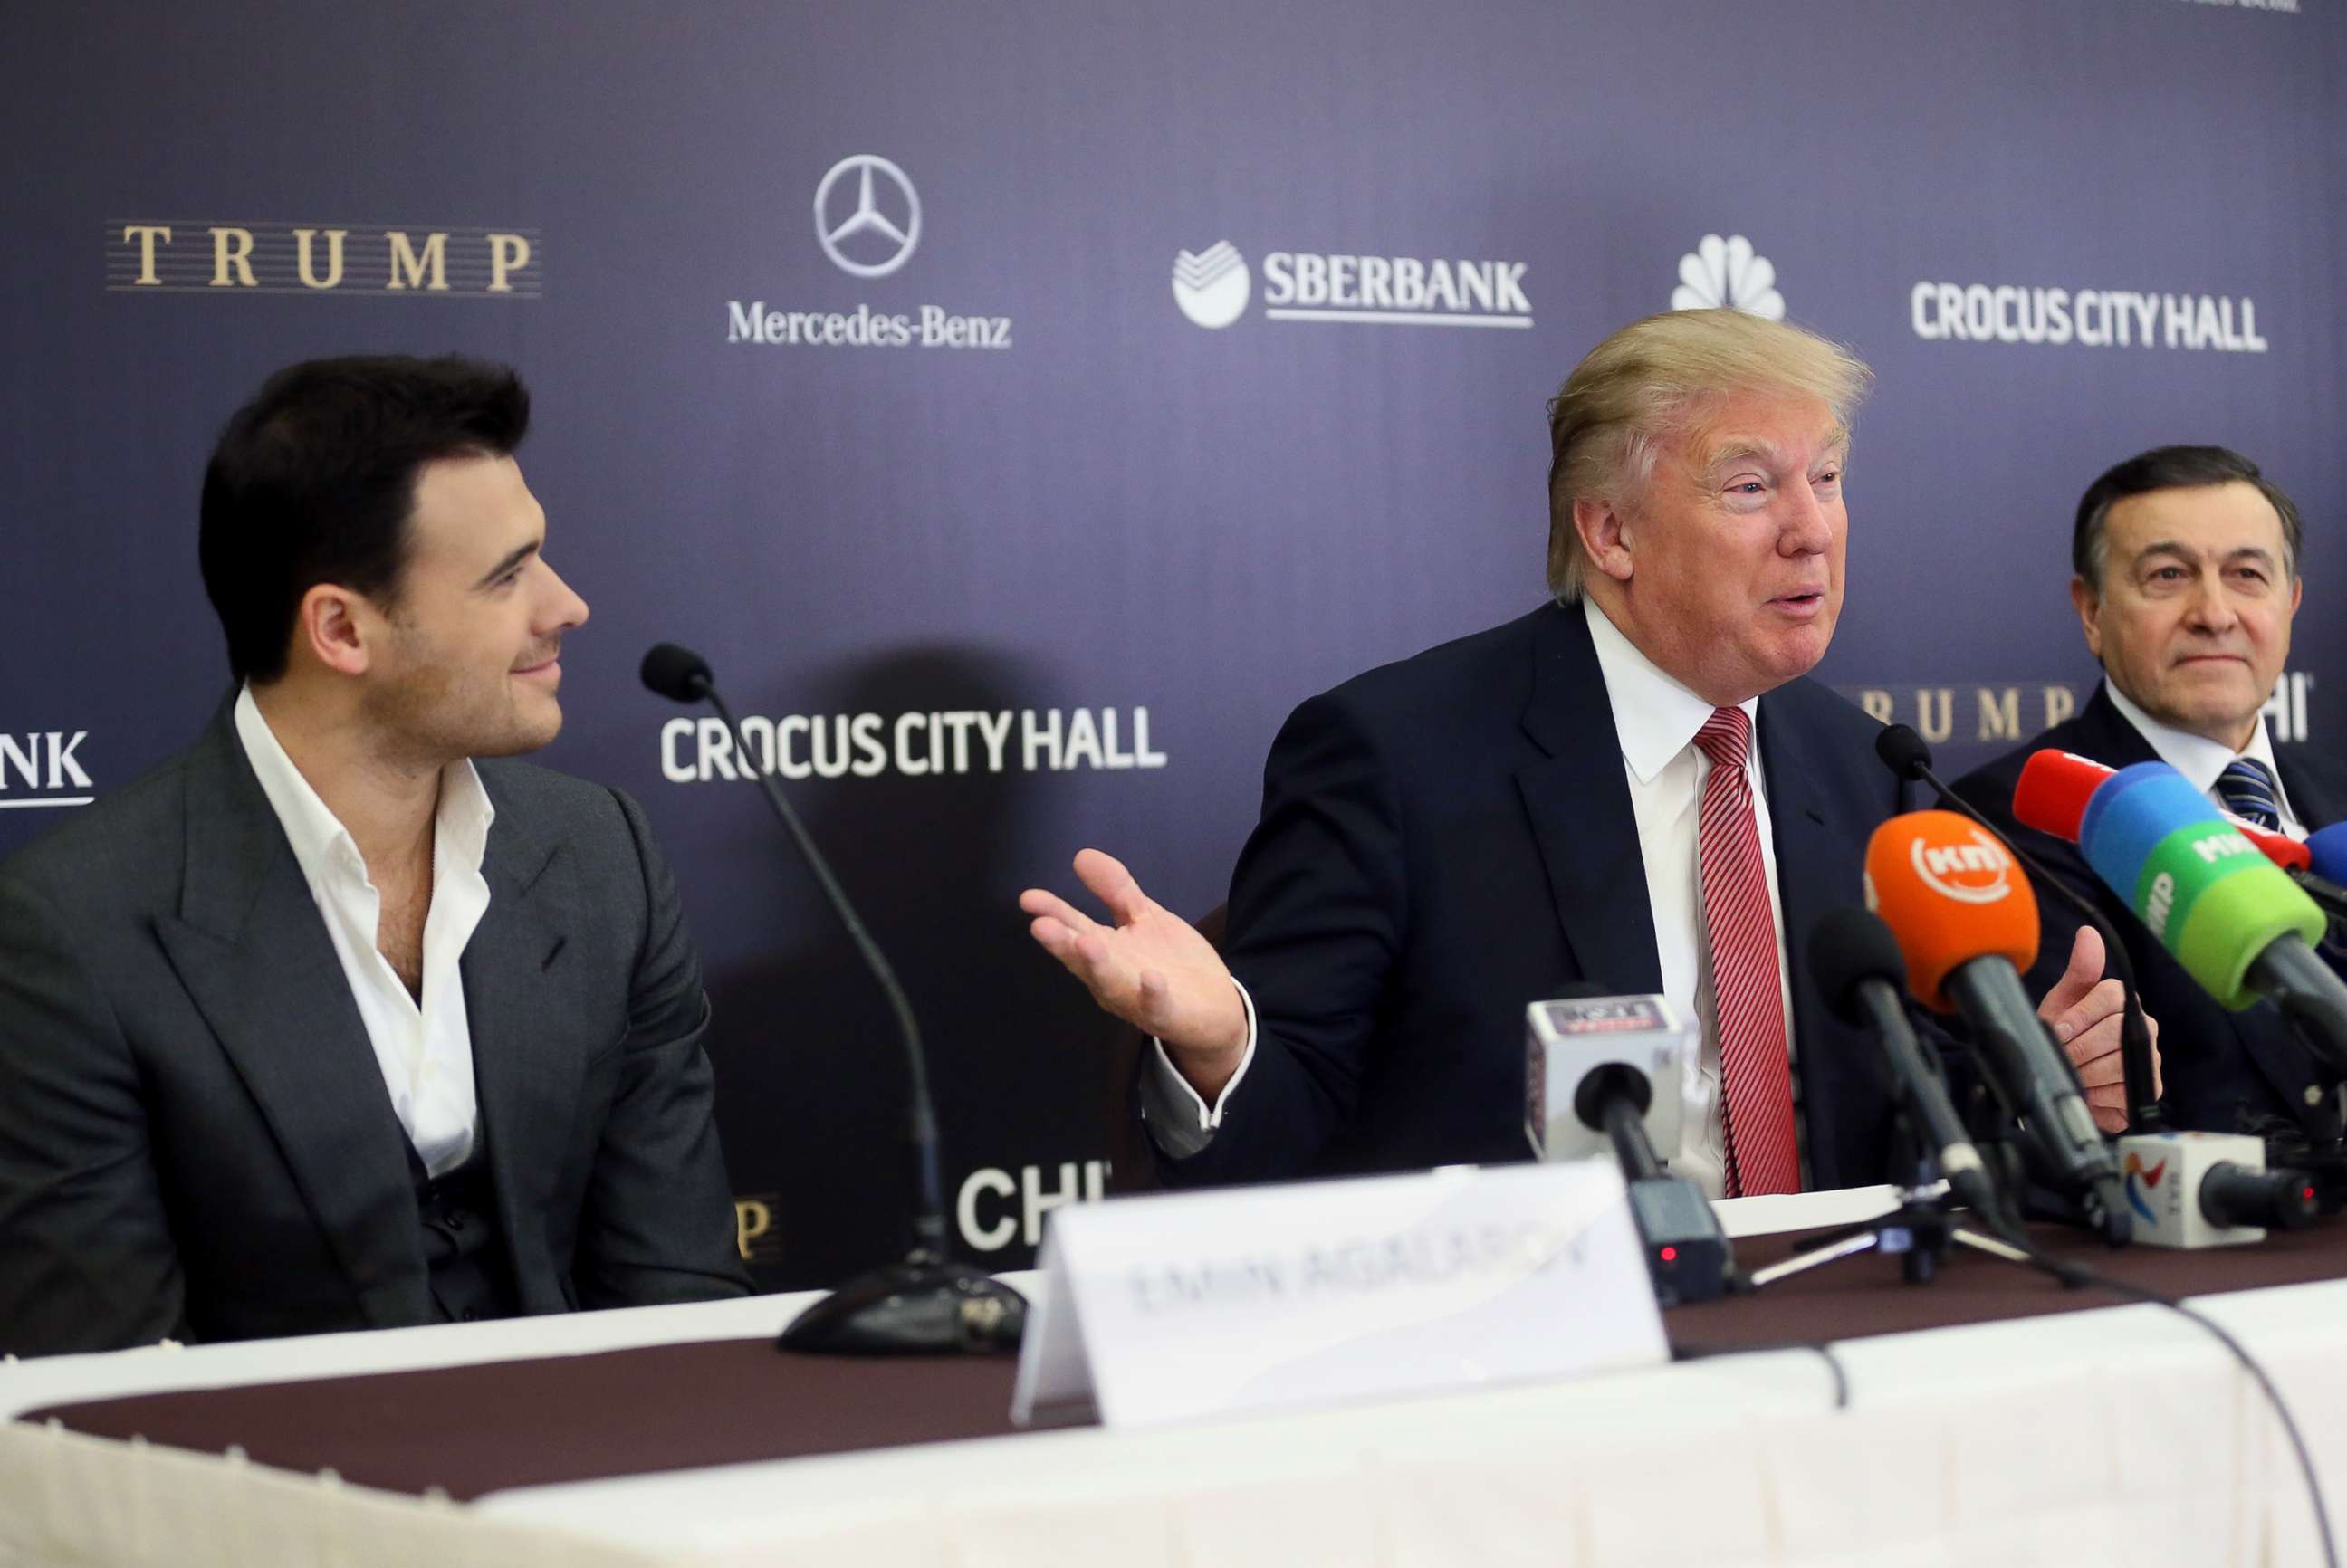 PHOTO: From left, Emin Agalarov, Donald Trump and Aras Agalarov give a press conference before the final show of the Miss Universe 2013 pageant in Moscow, Russia, Oct. 9, 2013.